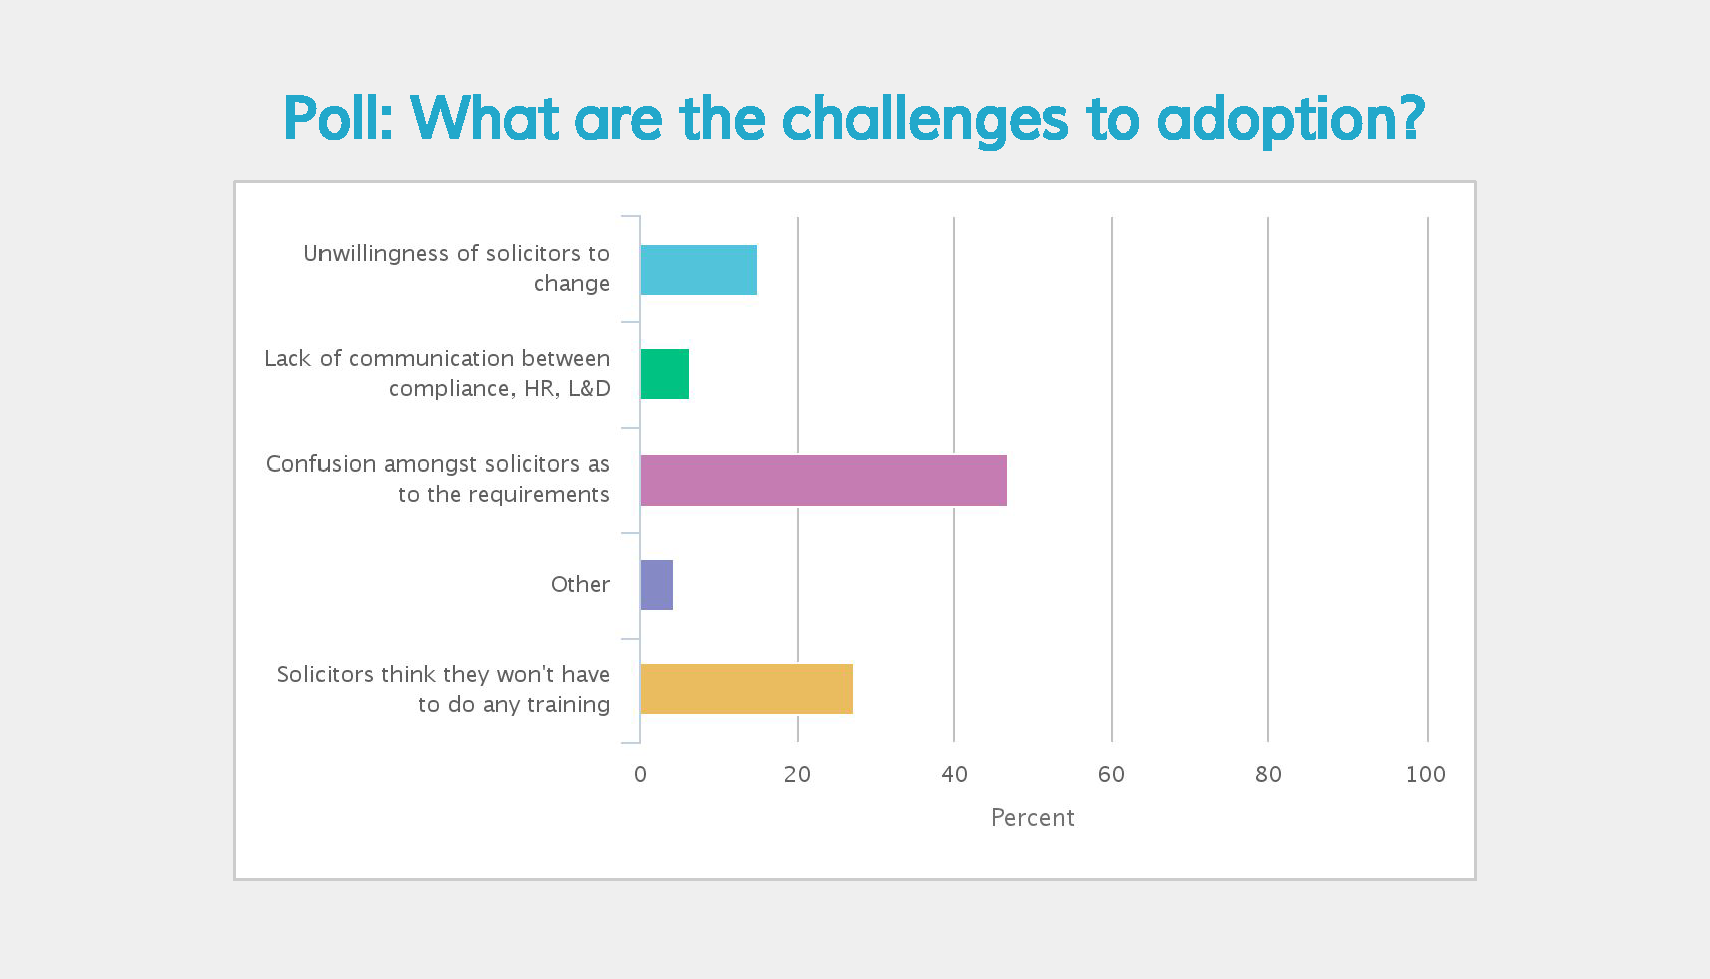 Challenges to adoption